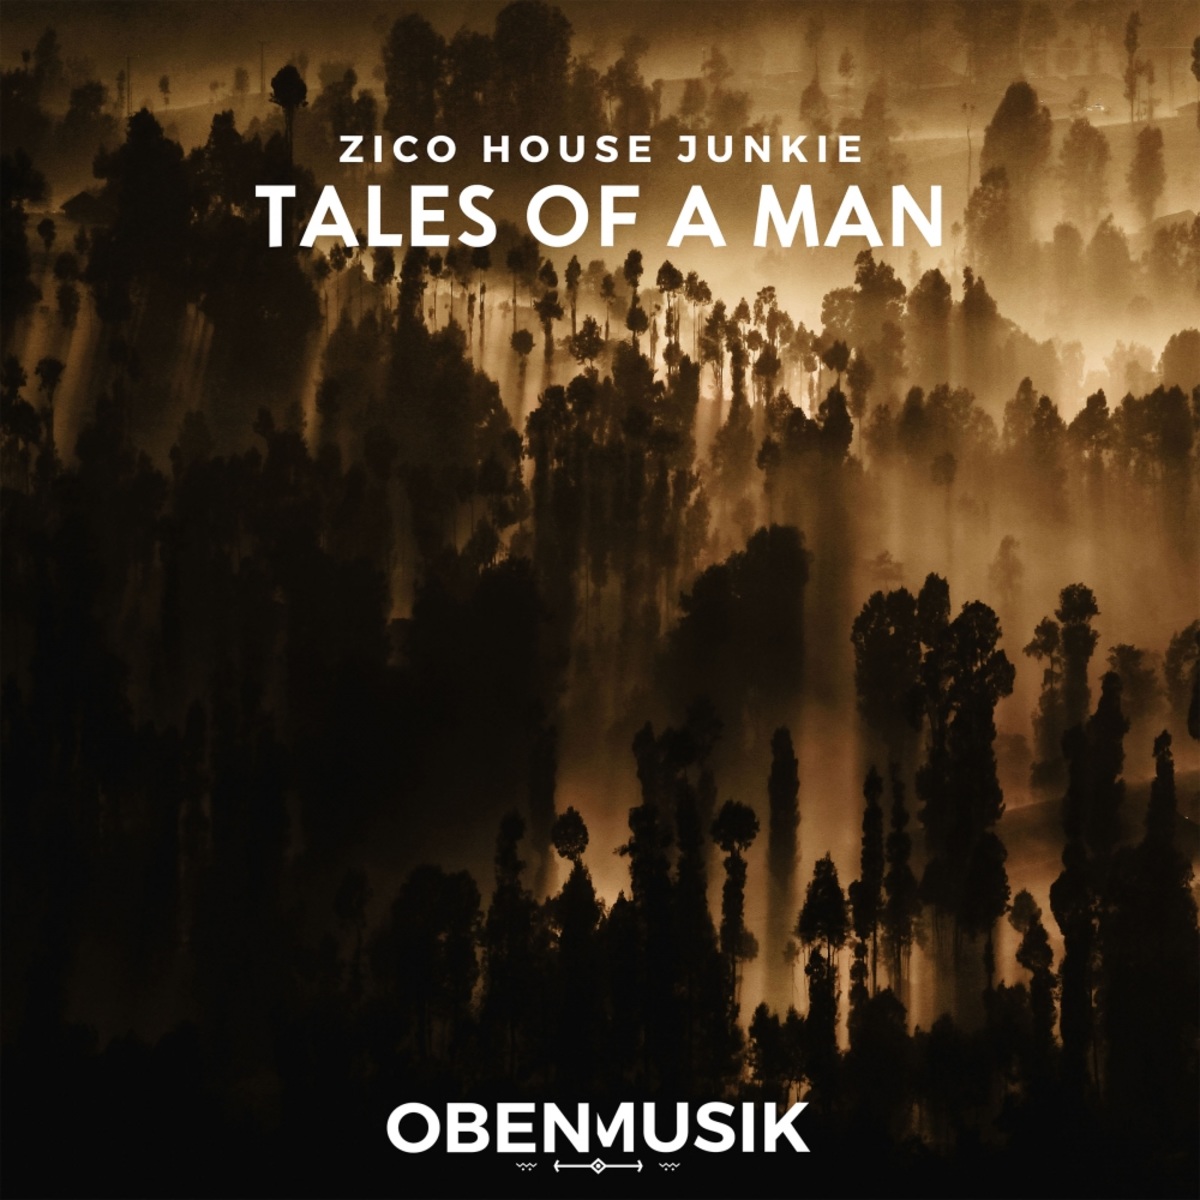 Zico House Junkie - Tales Of A Man / Obenmusik